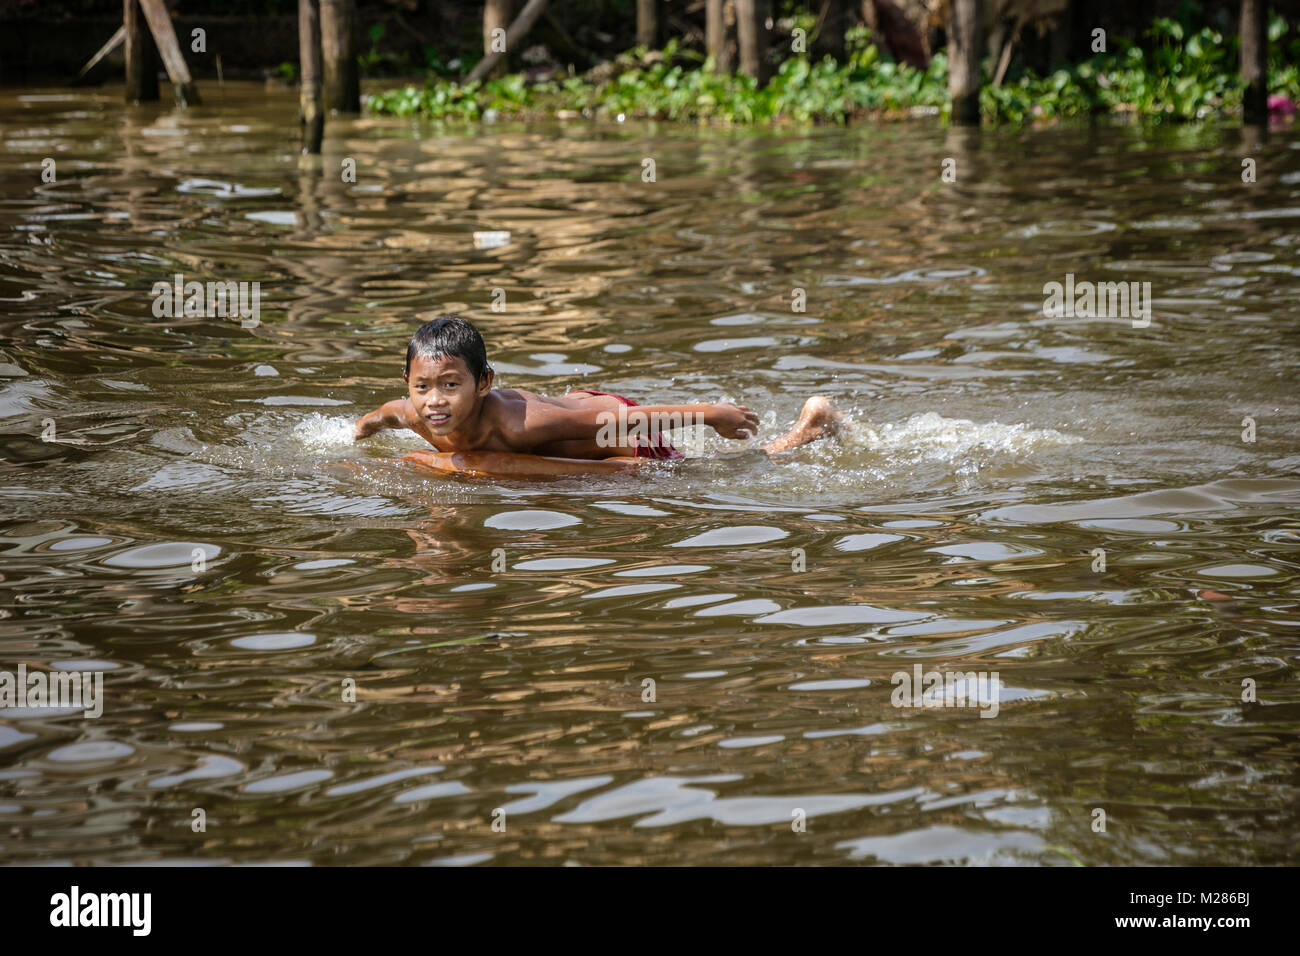 Asian Boy Swimming High Resolution Stock Photography and ...